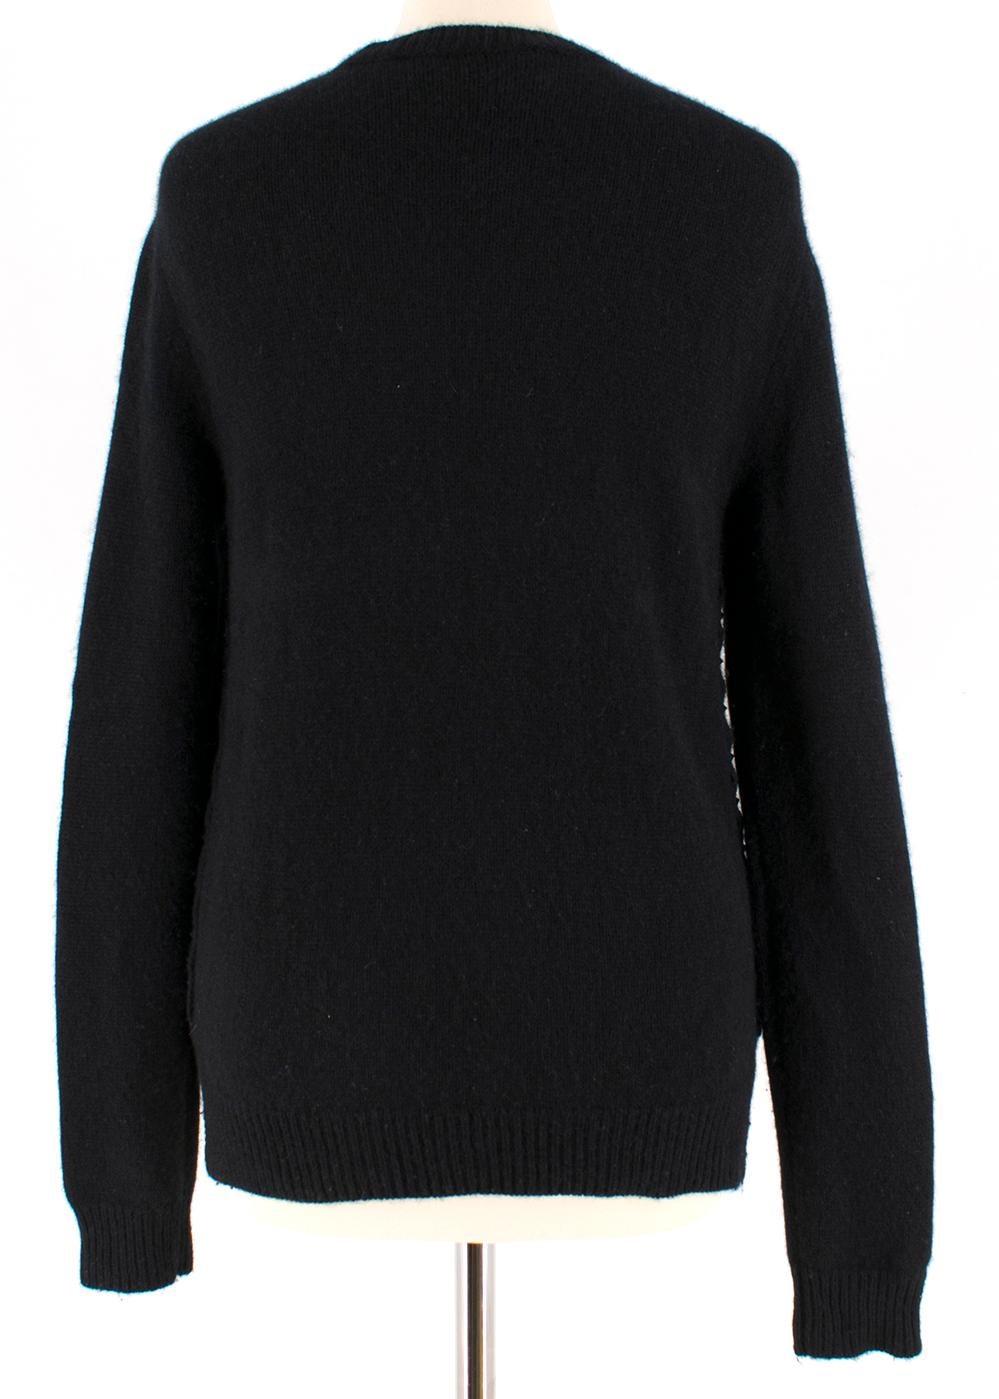 Valentino Cashmere Black Rockstud Knit Sweater S In Good Condition For Sale In London, GB